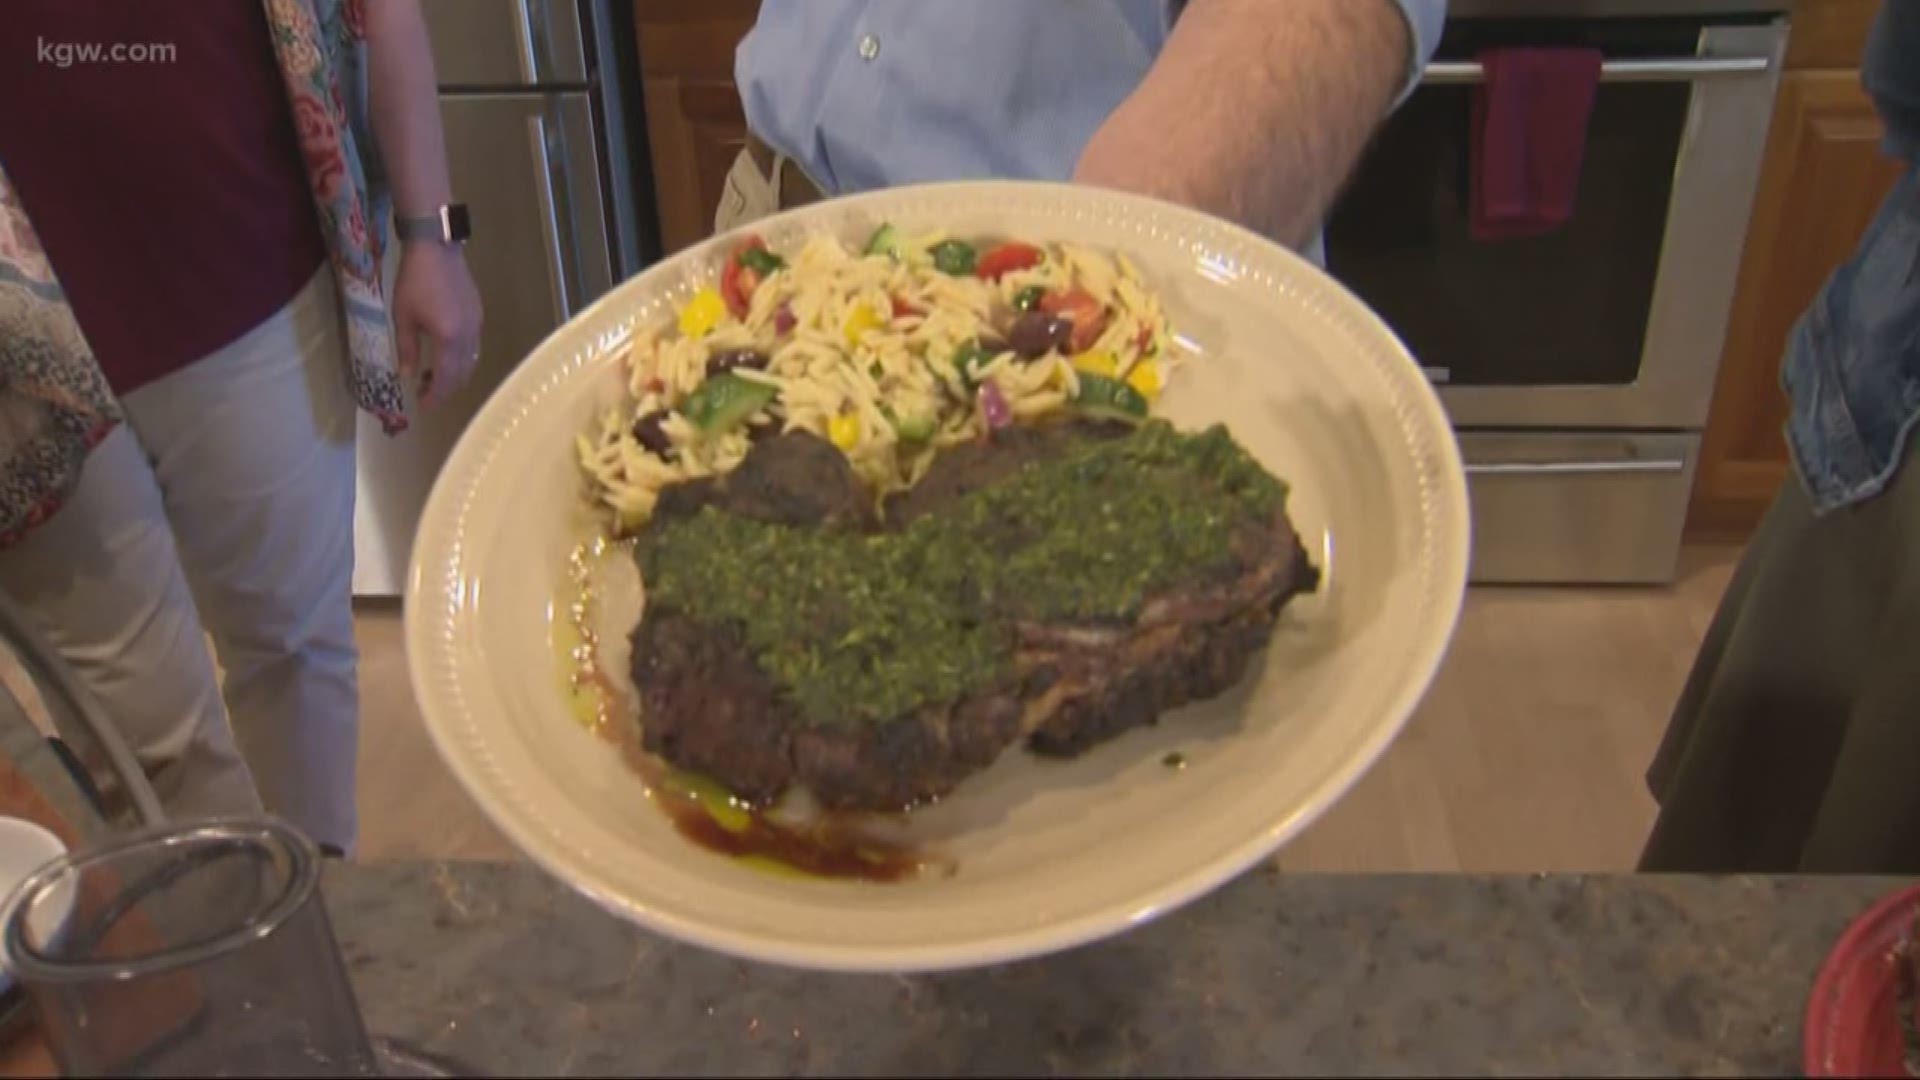 KGW Sunrise viewers mom Karen and daughter Kelsey made rib-eye steaks with chimichurri sauce, plus a pasta salad.